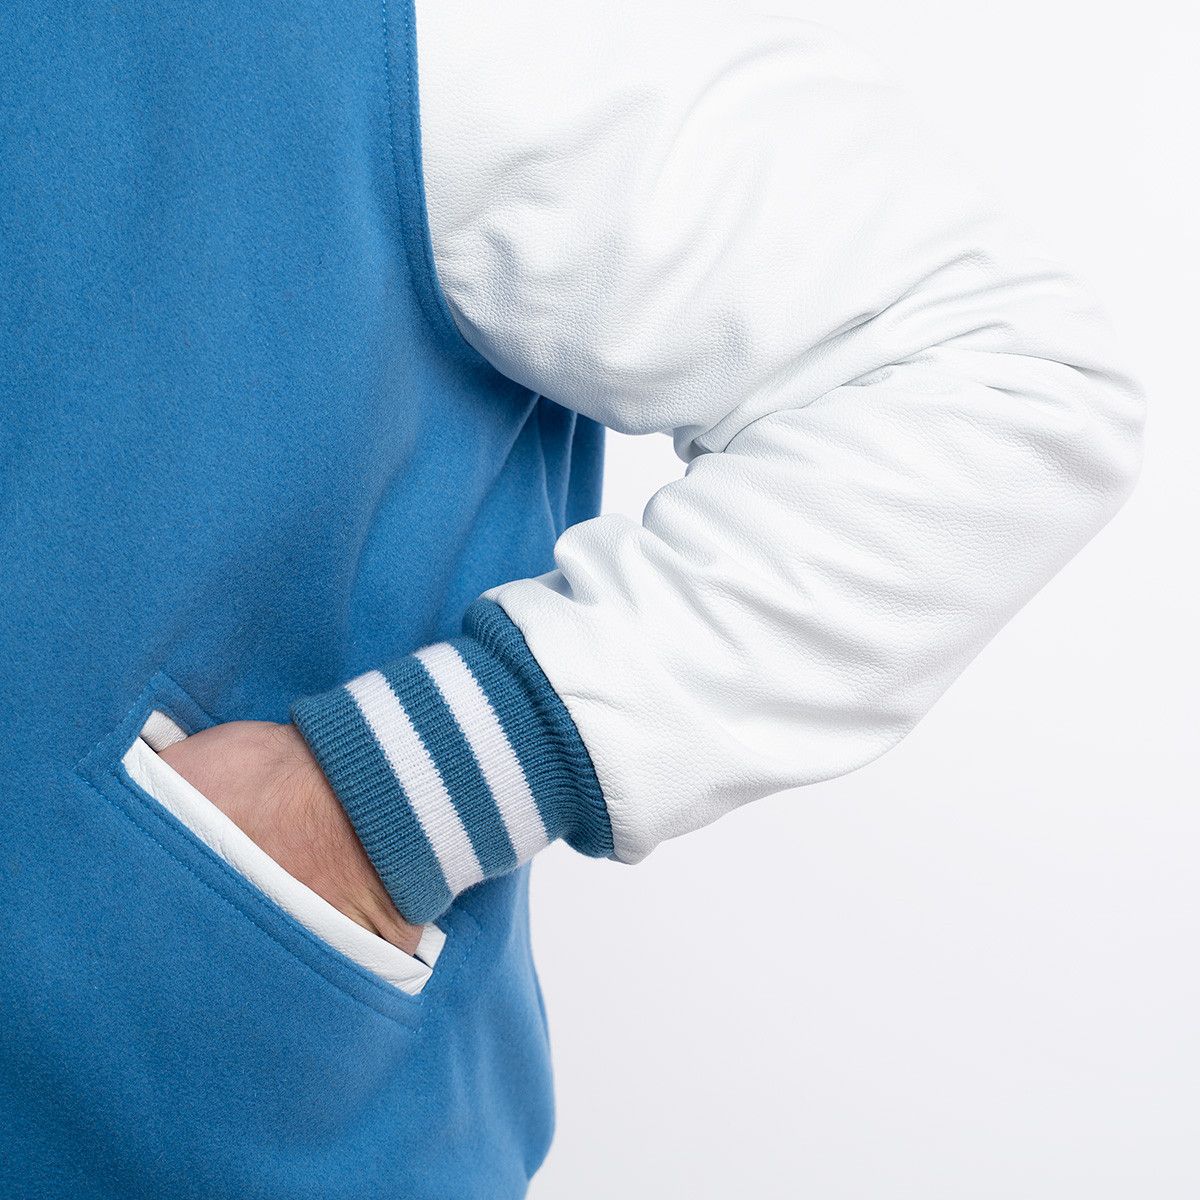 Navy Blue Wool Body & Bright White Leather Sleeves Letterman Jacket